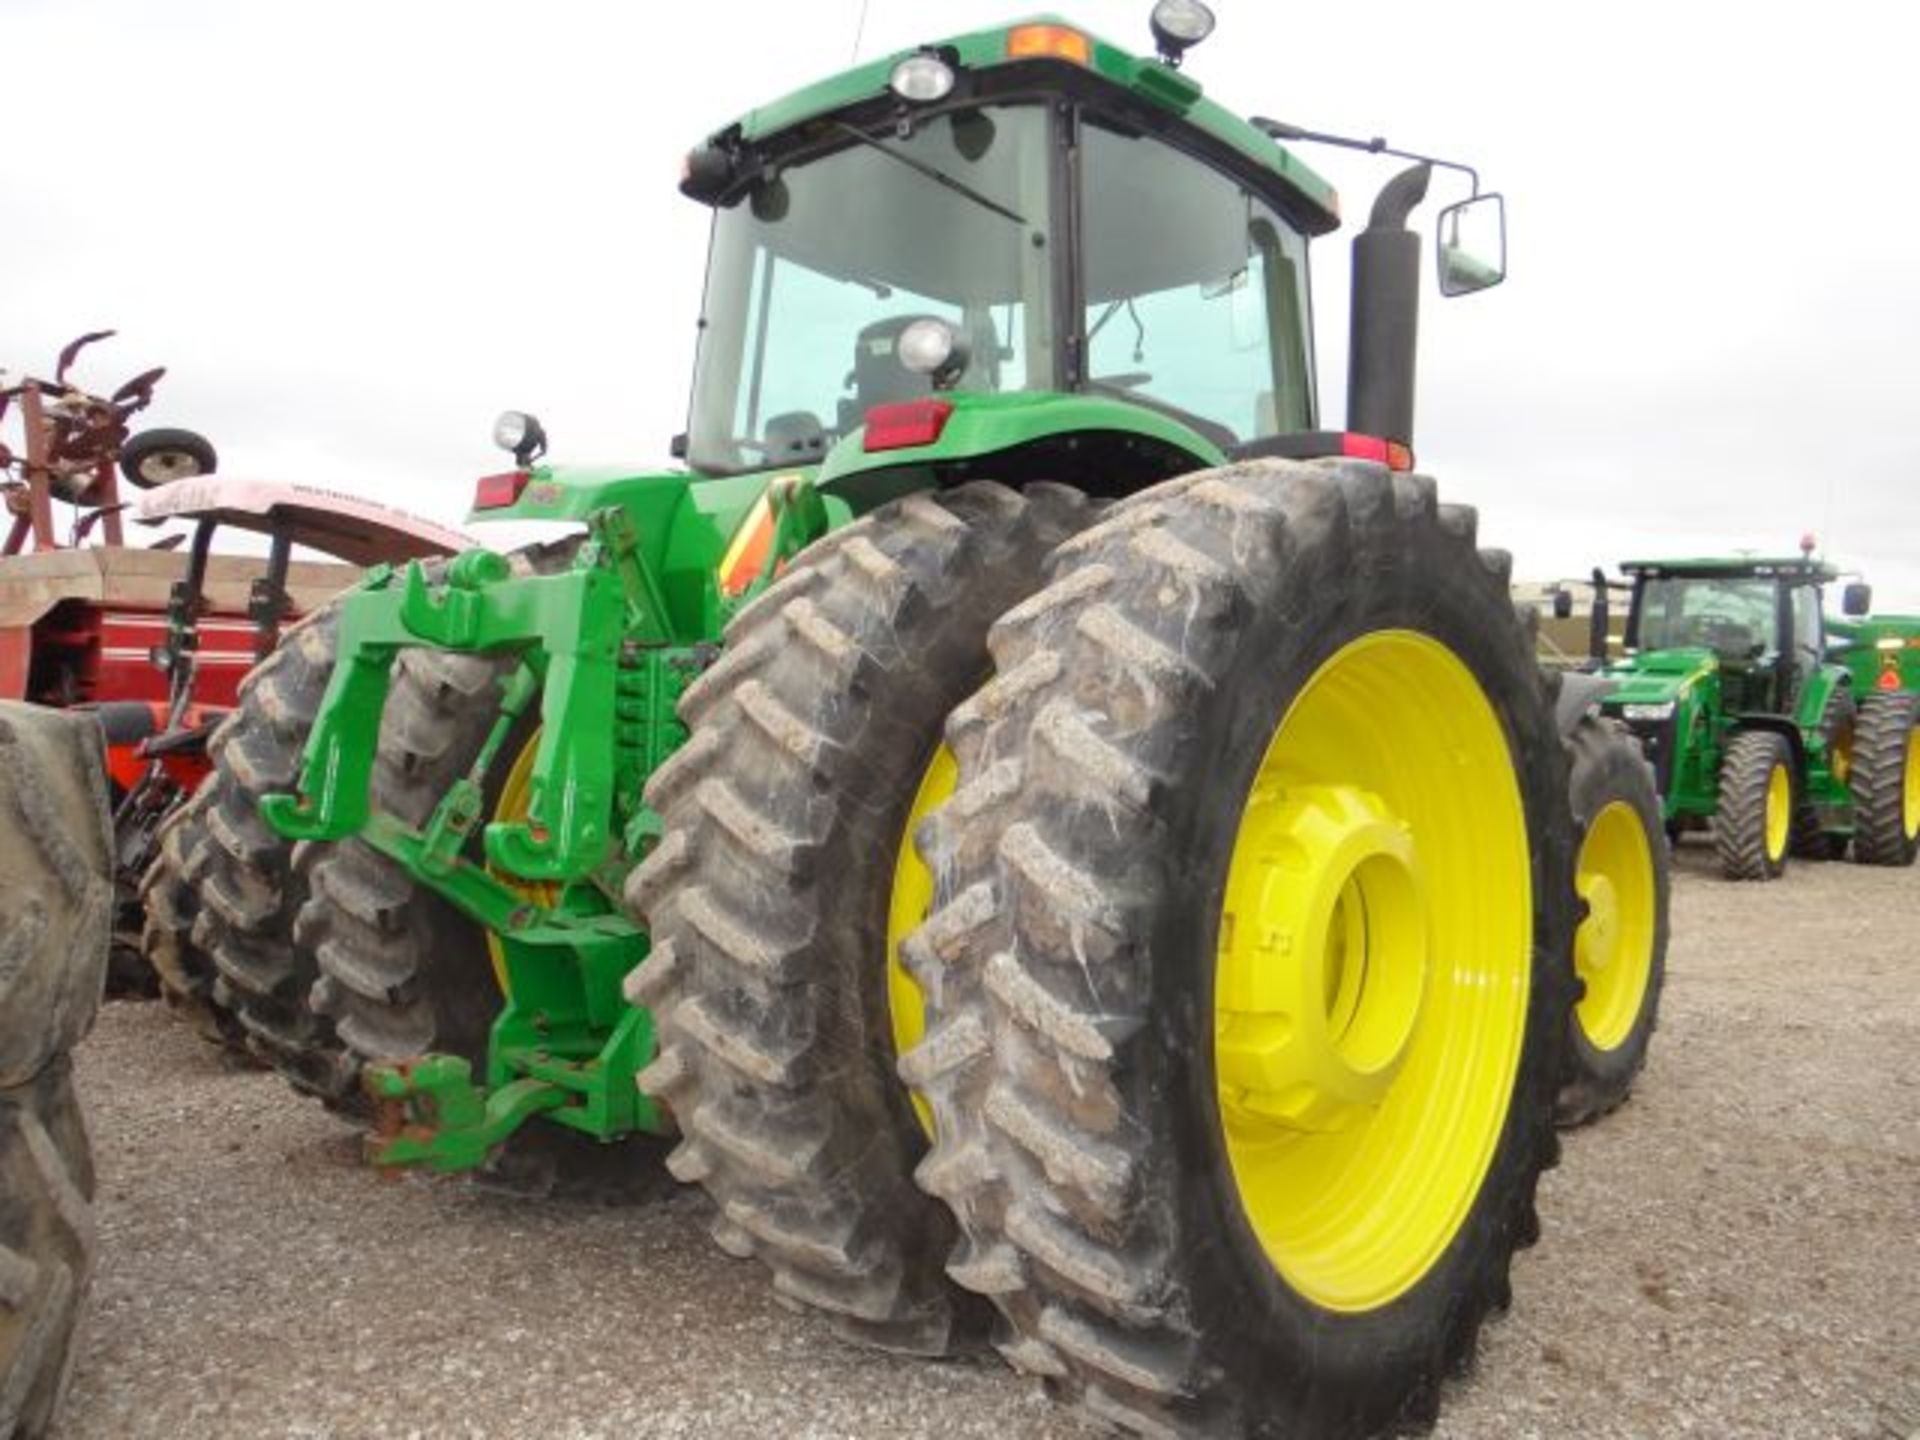 JD8520 Tractor, 2005 Powershift, ILS, 50" Tires, Wt Kit, 4410 hrs - Image 2 of 6